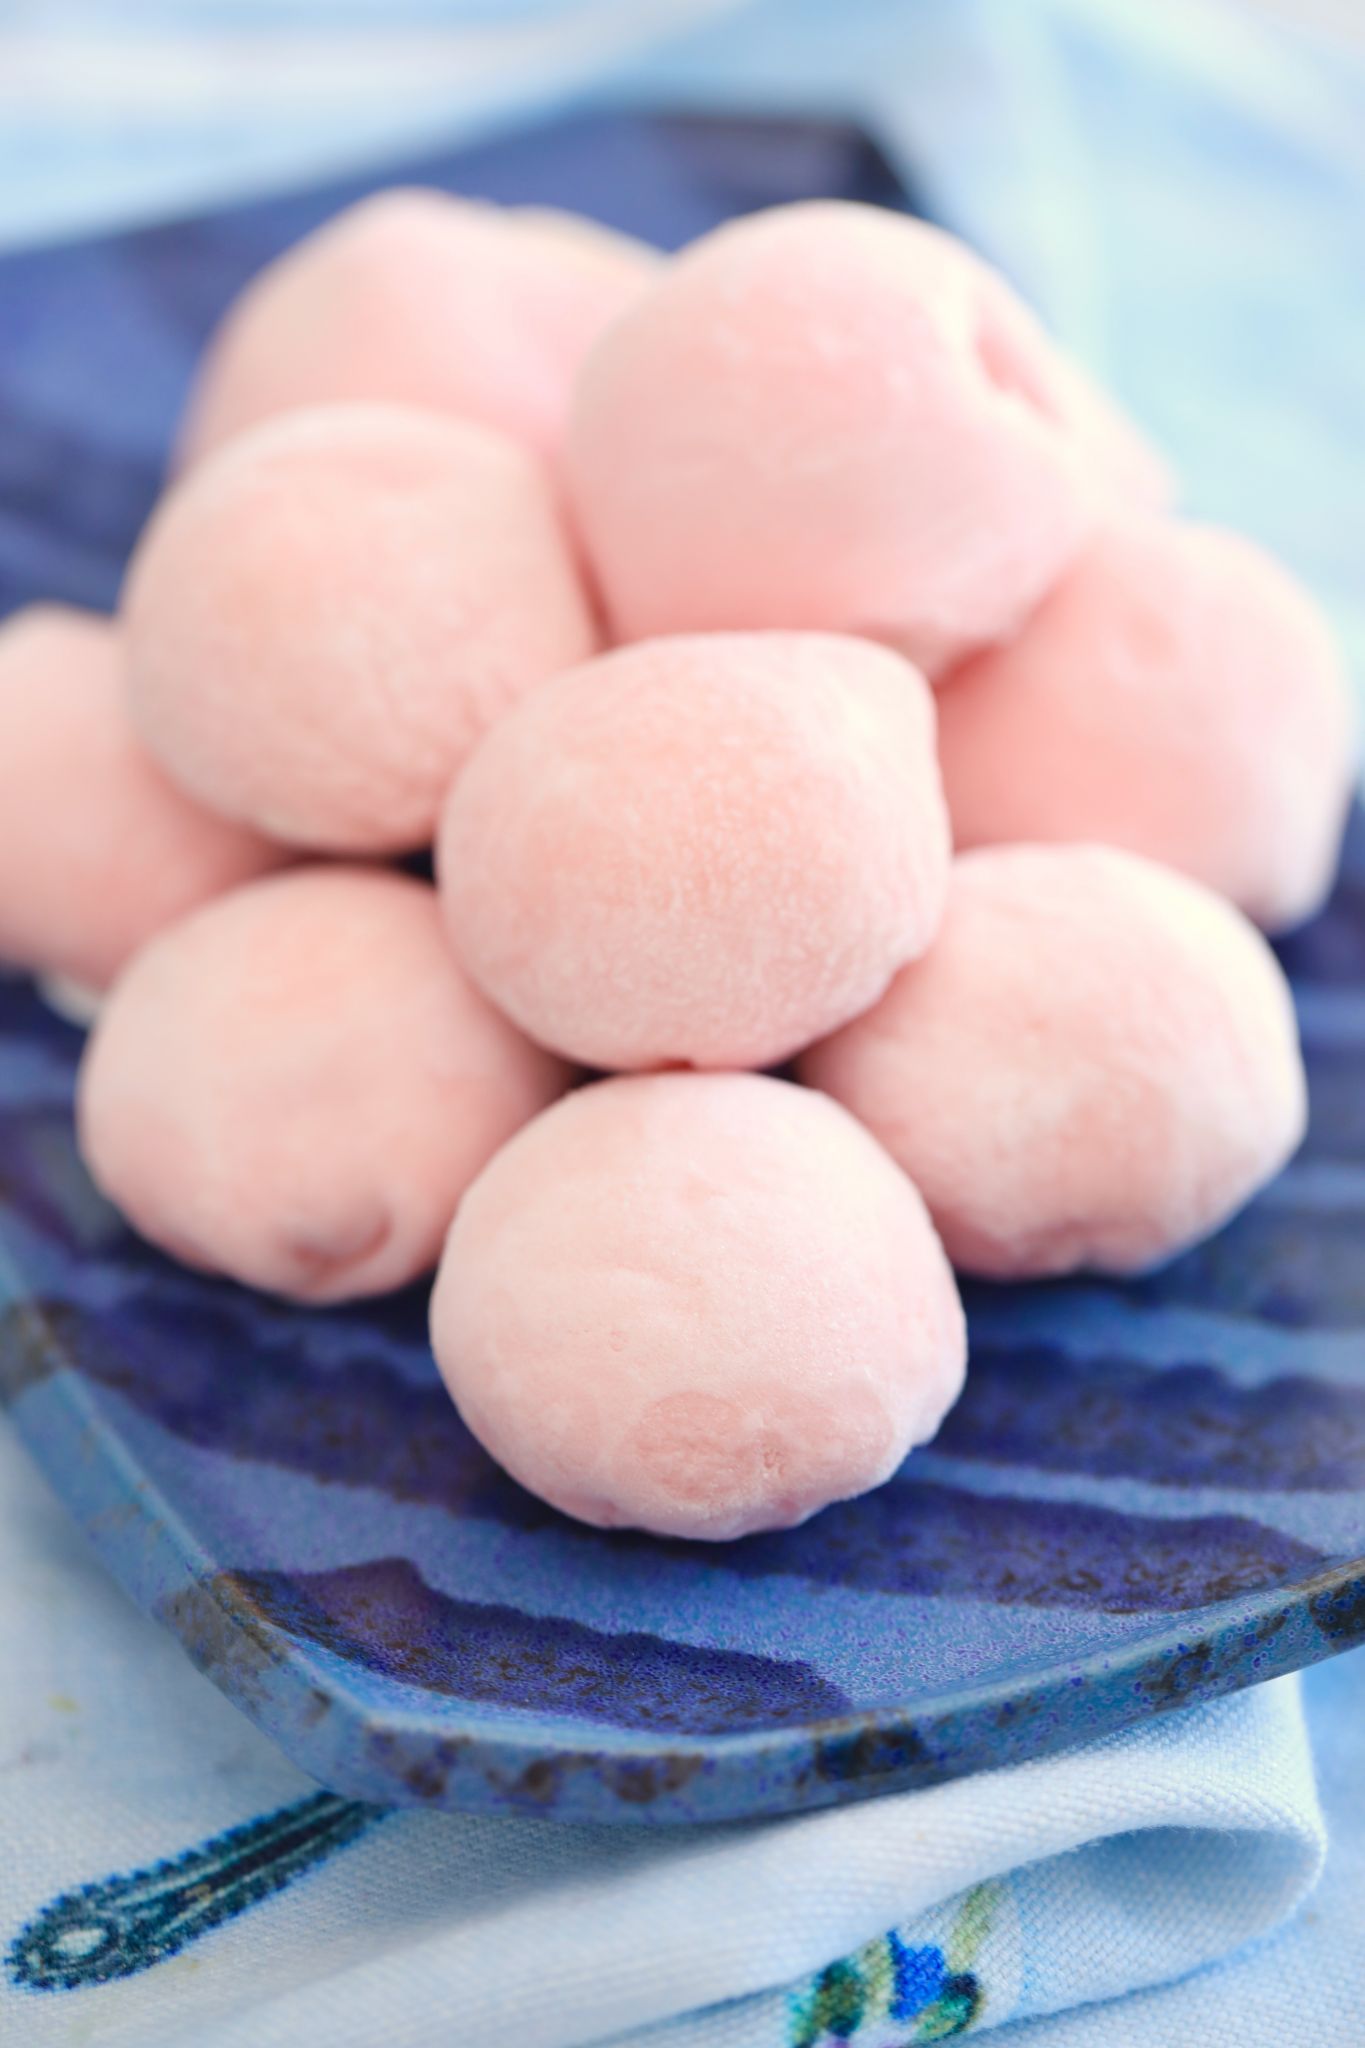 My finished Japanese Mochi Ice Cream recipe, pink, and stacked high.